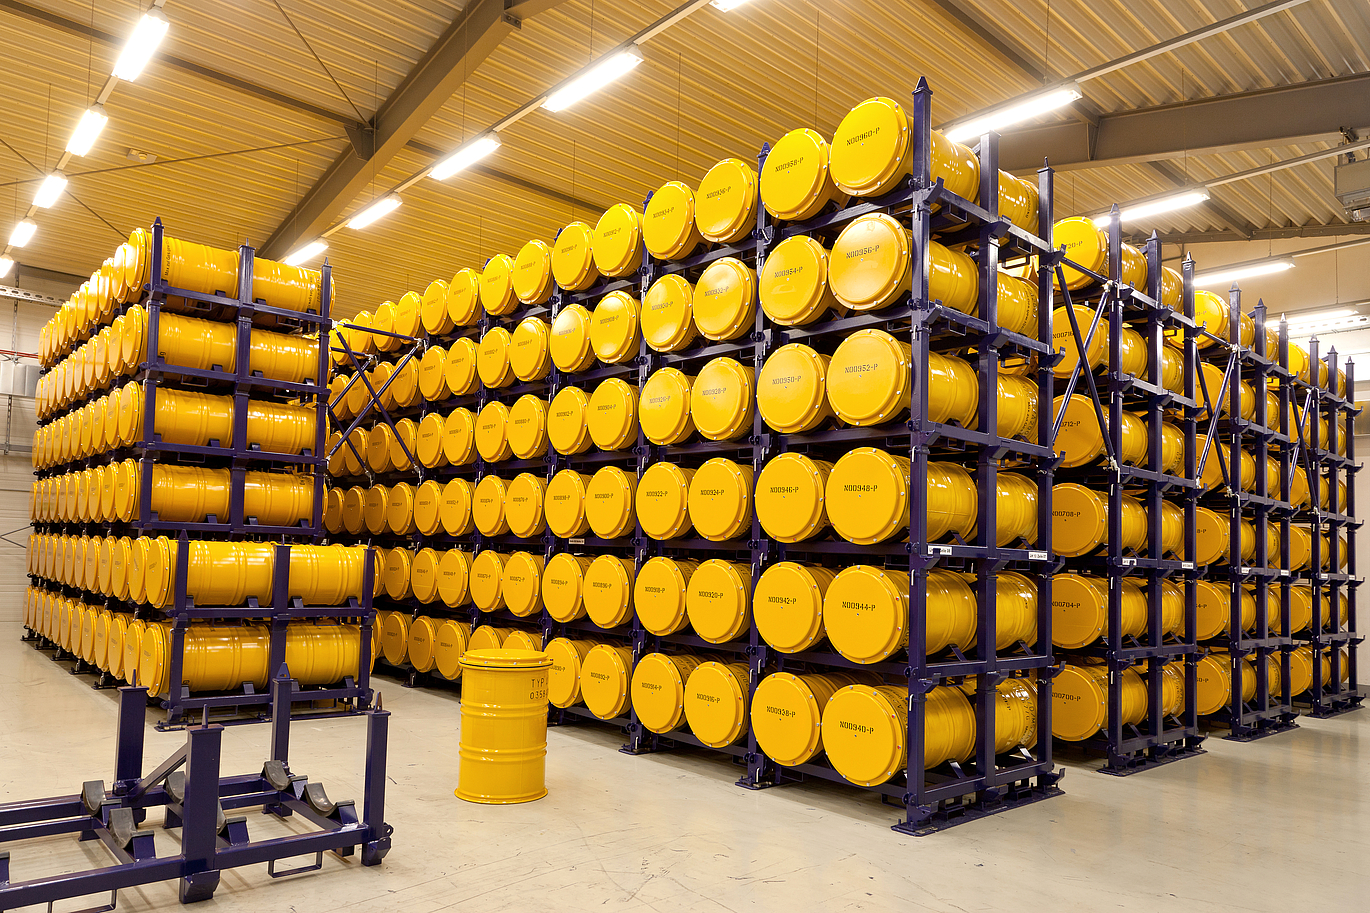 Glance inin the interim storage, yellow barrels are stacked on blue metal shelves. A yellow barrel is in the aisle. (Enlarges Image in Dialog Window)